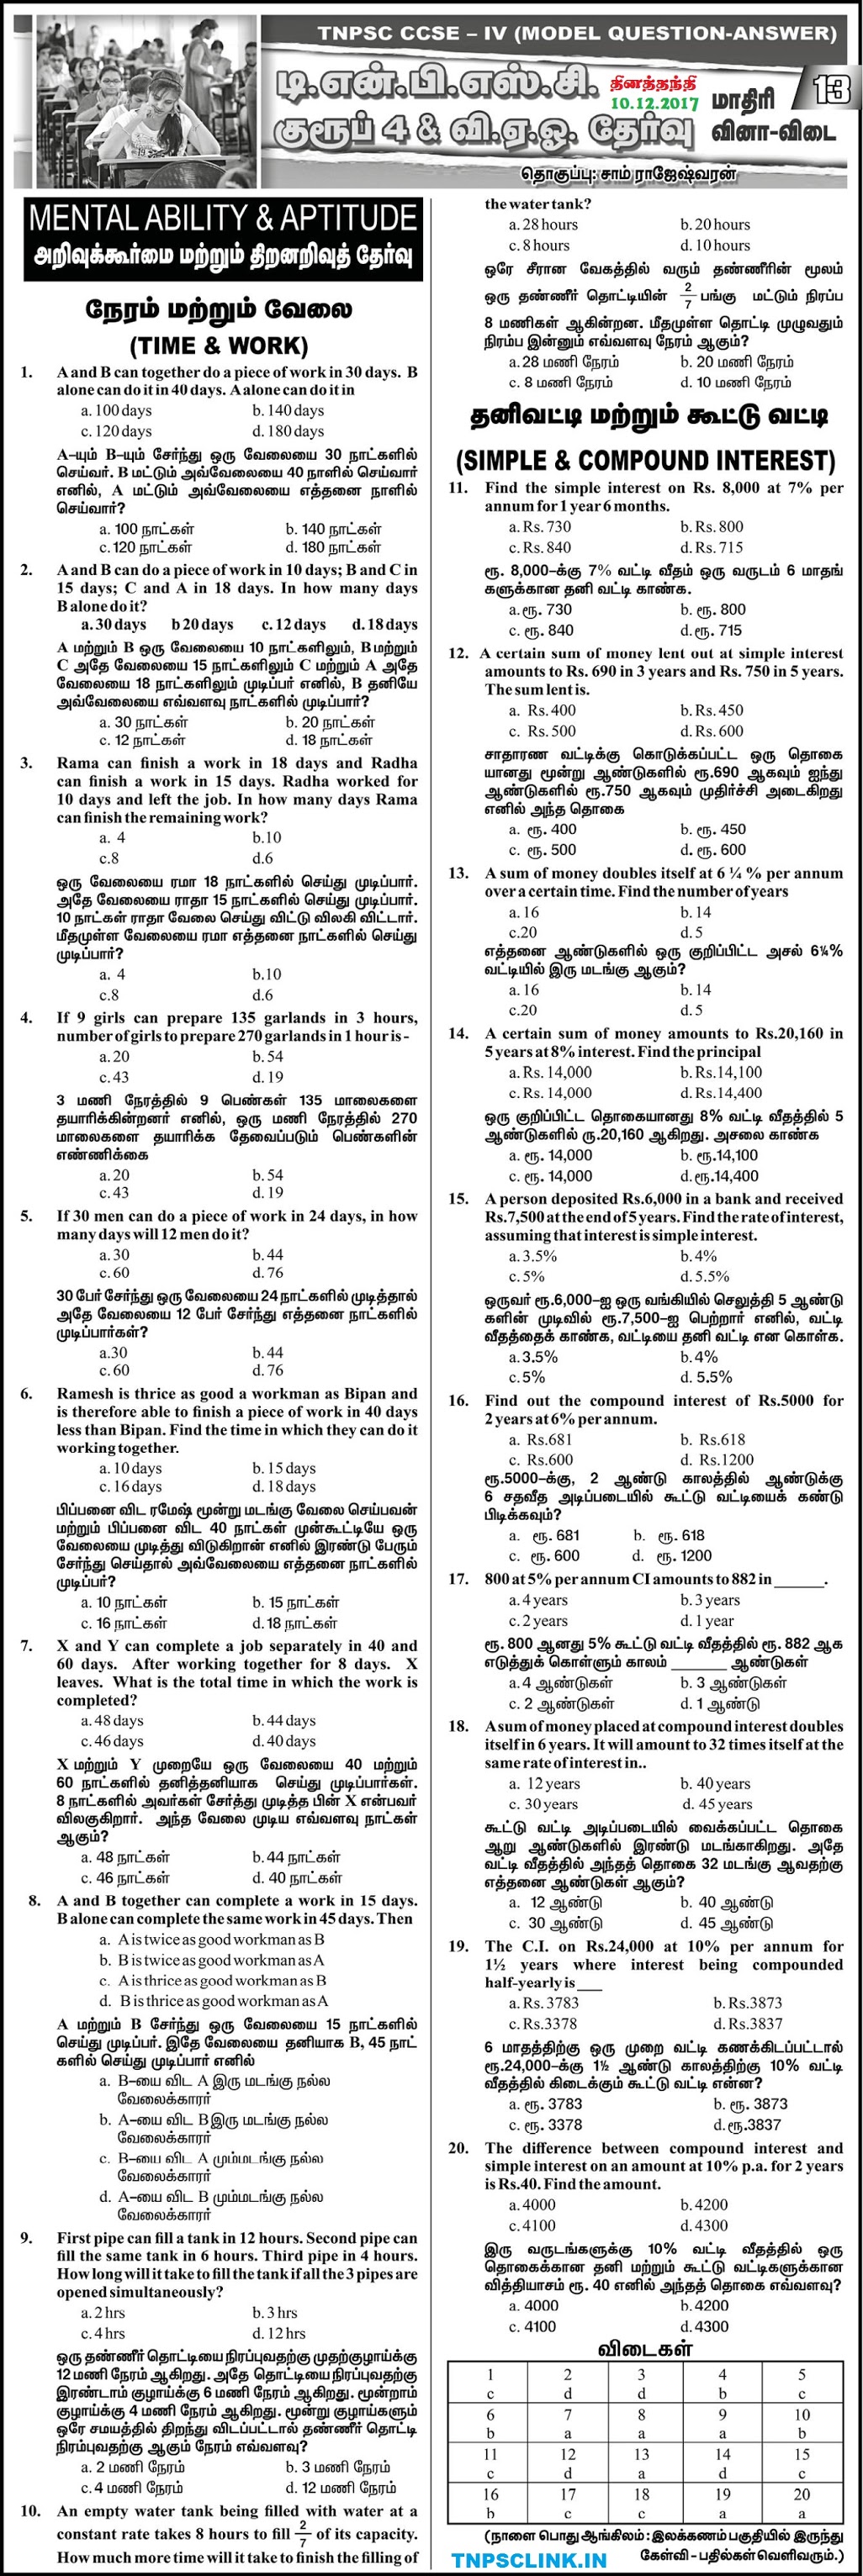 TNPSC Group 4 Mental Ability Aptitude Model Papers Dinathanthi 10 12 2017 Download As PDF